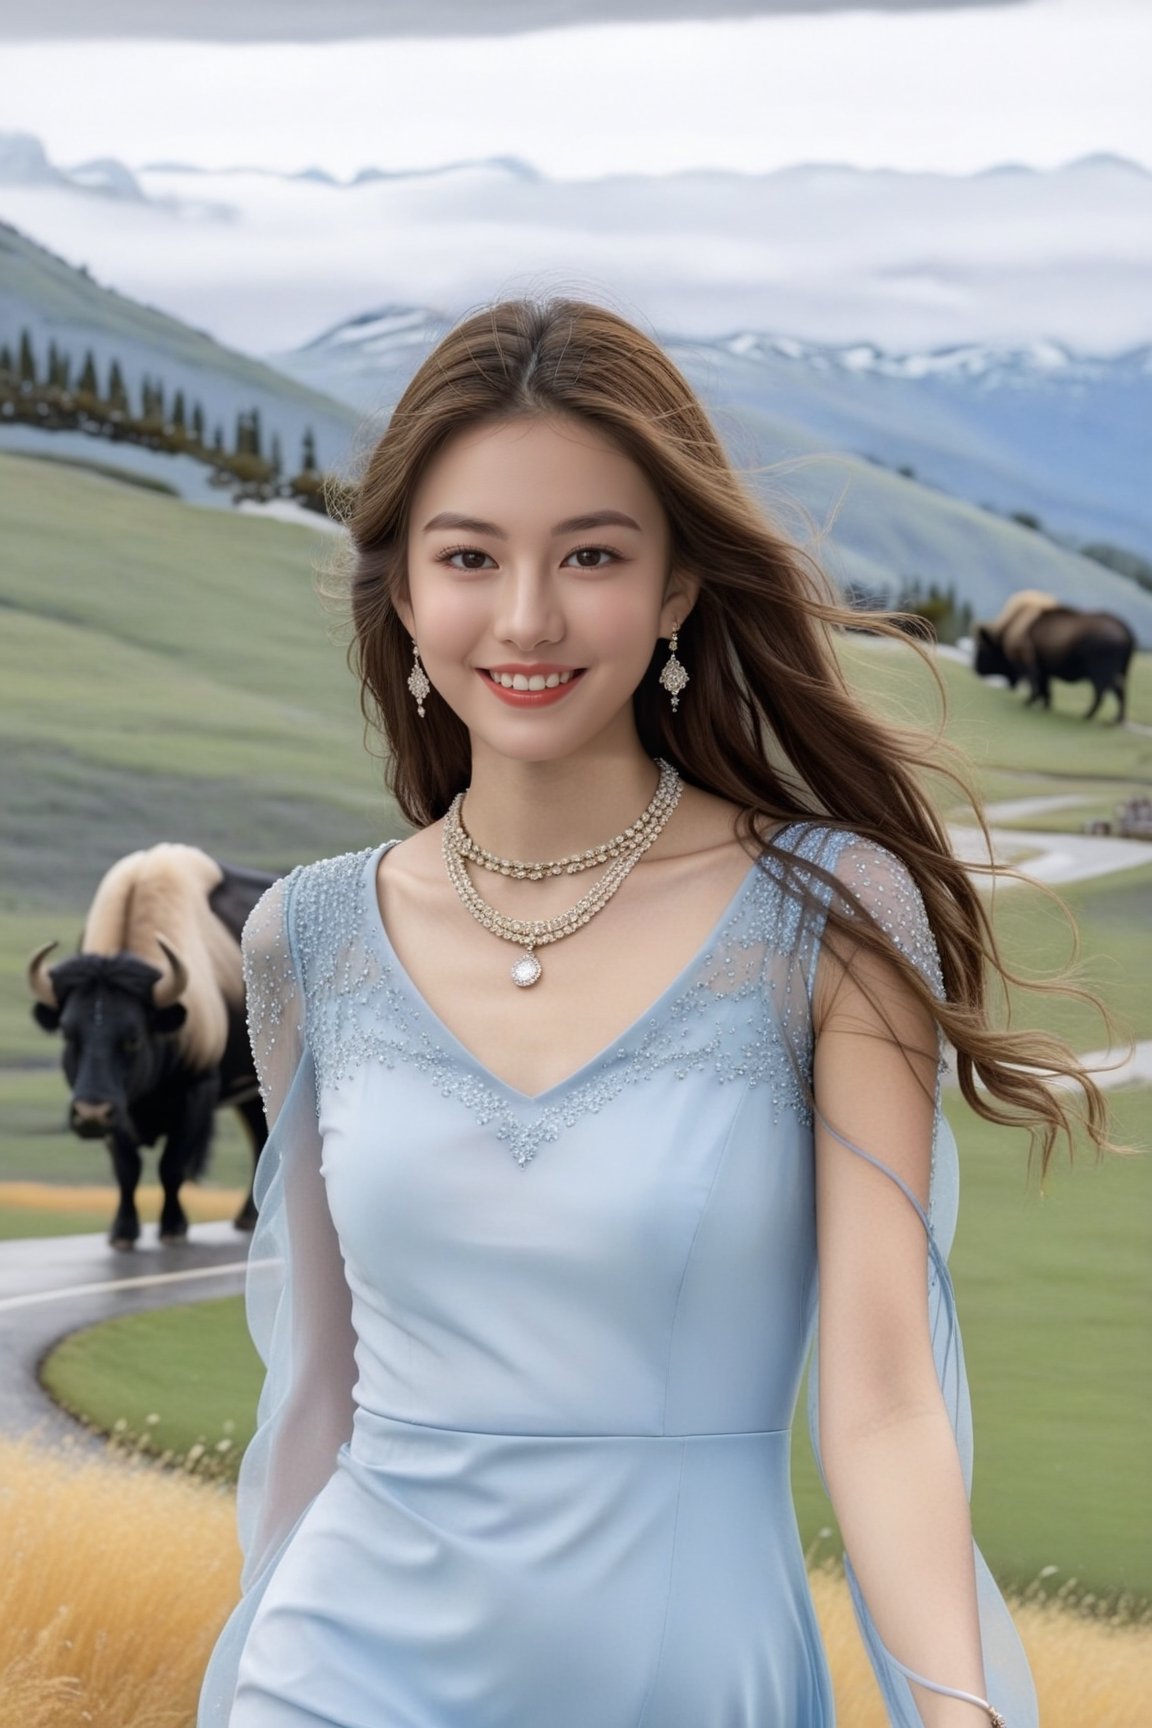 Hyper-Realistic photo of a girl,20yo,1girl,perfect female form,perfect body proportion,perfect anatomy,[baby blue and ivory color],elegant dress,detailed exquisite face,soft shiny skin,smile,mesmerizing,detailed shiny long hair blowing,small earrings,necklaces,Chanel bag,cluttered maximalism
BREAK
[backdrop of lamarva11ey,outdoors,sky,day, cloud,tree,cloudy sky,grass,nature,beautiful scenery,mountain,winding road,landscape,american bisons],(girl focus:1.2)
BREAK
(rule of thirds:1.3),perfect composition,studio photo,trending on artstation,(Masterpiece,Best quality,32k,UHD:1.4),(sharp focus,high contrast,HDR,hyper-detailed,intricate details,ultra-realistic,award-winning photo,ultra-clear,kodachrome 800:1.25),(infinite depth of perspective:2),(chiaroscuro lighting,soft rim lighting:1.15),by Karol Bak,Antonio Lopez,Gustav Klimt and Hayao Miyazaki,photo_b00ster,real_booster,art_booster,Ye11owst0ne,koh_yunjung